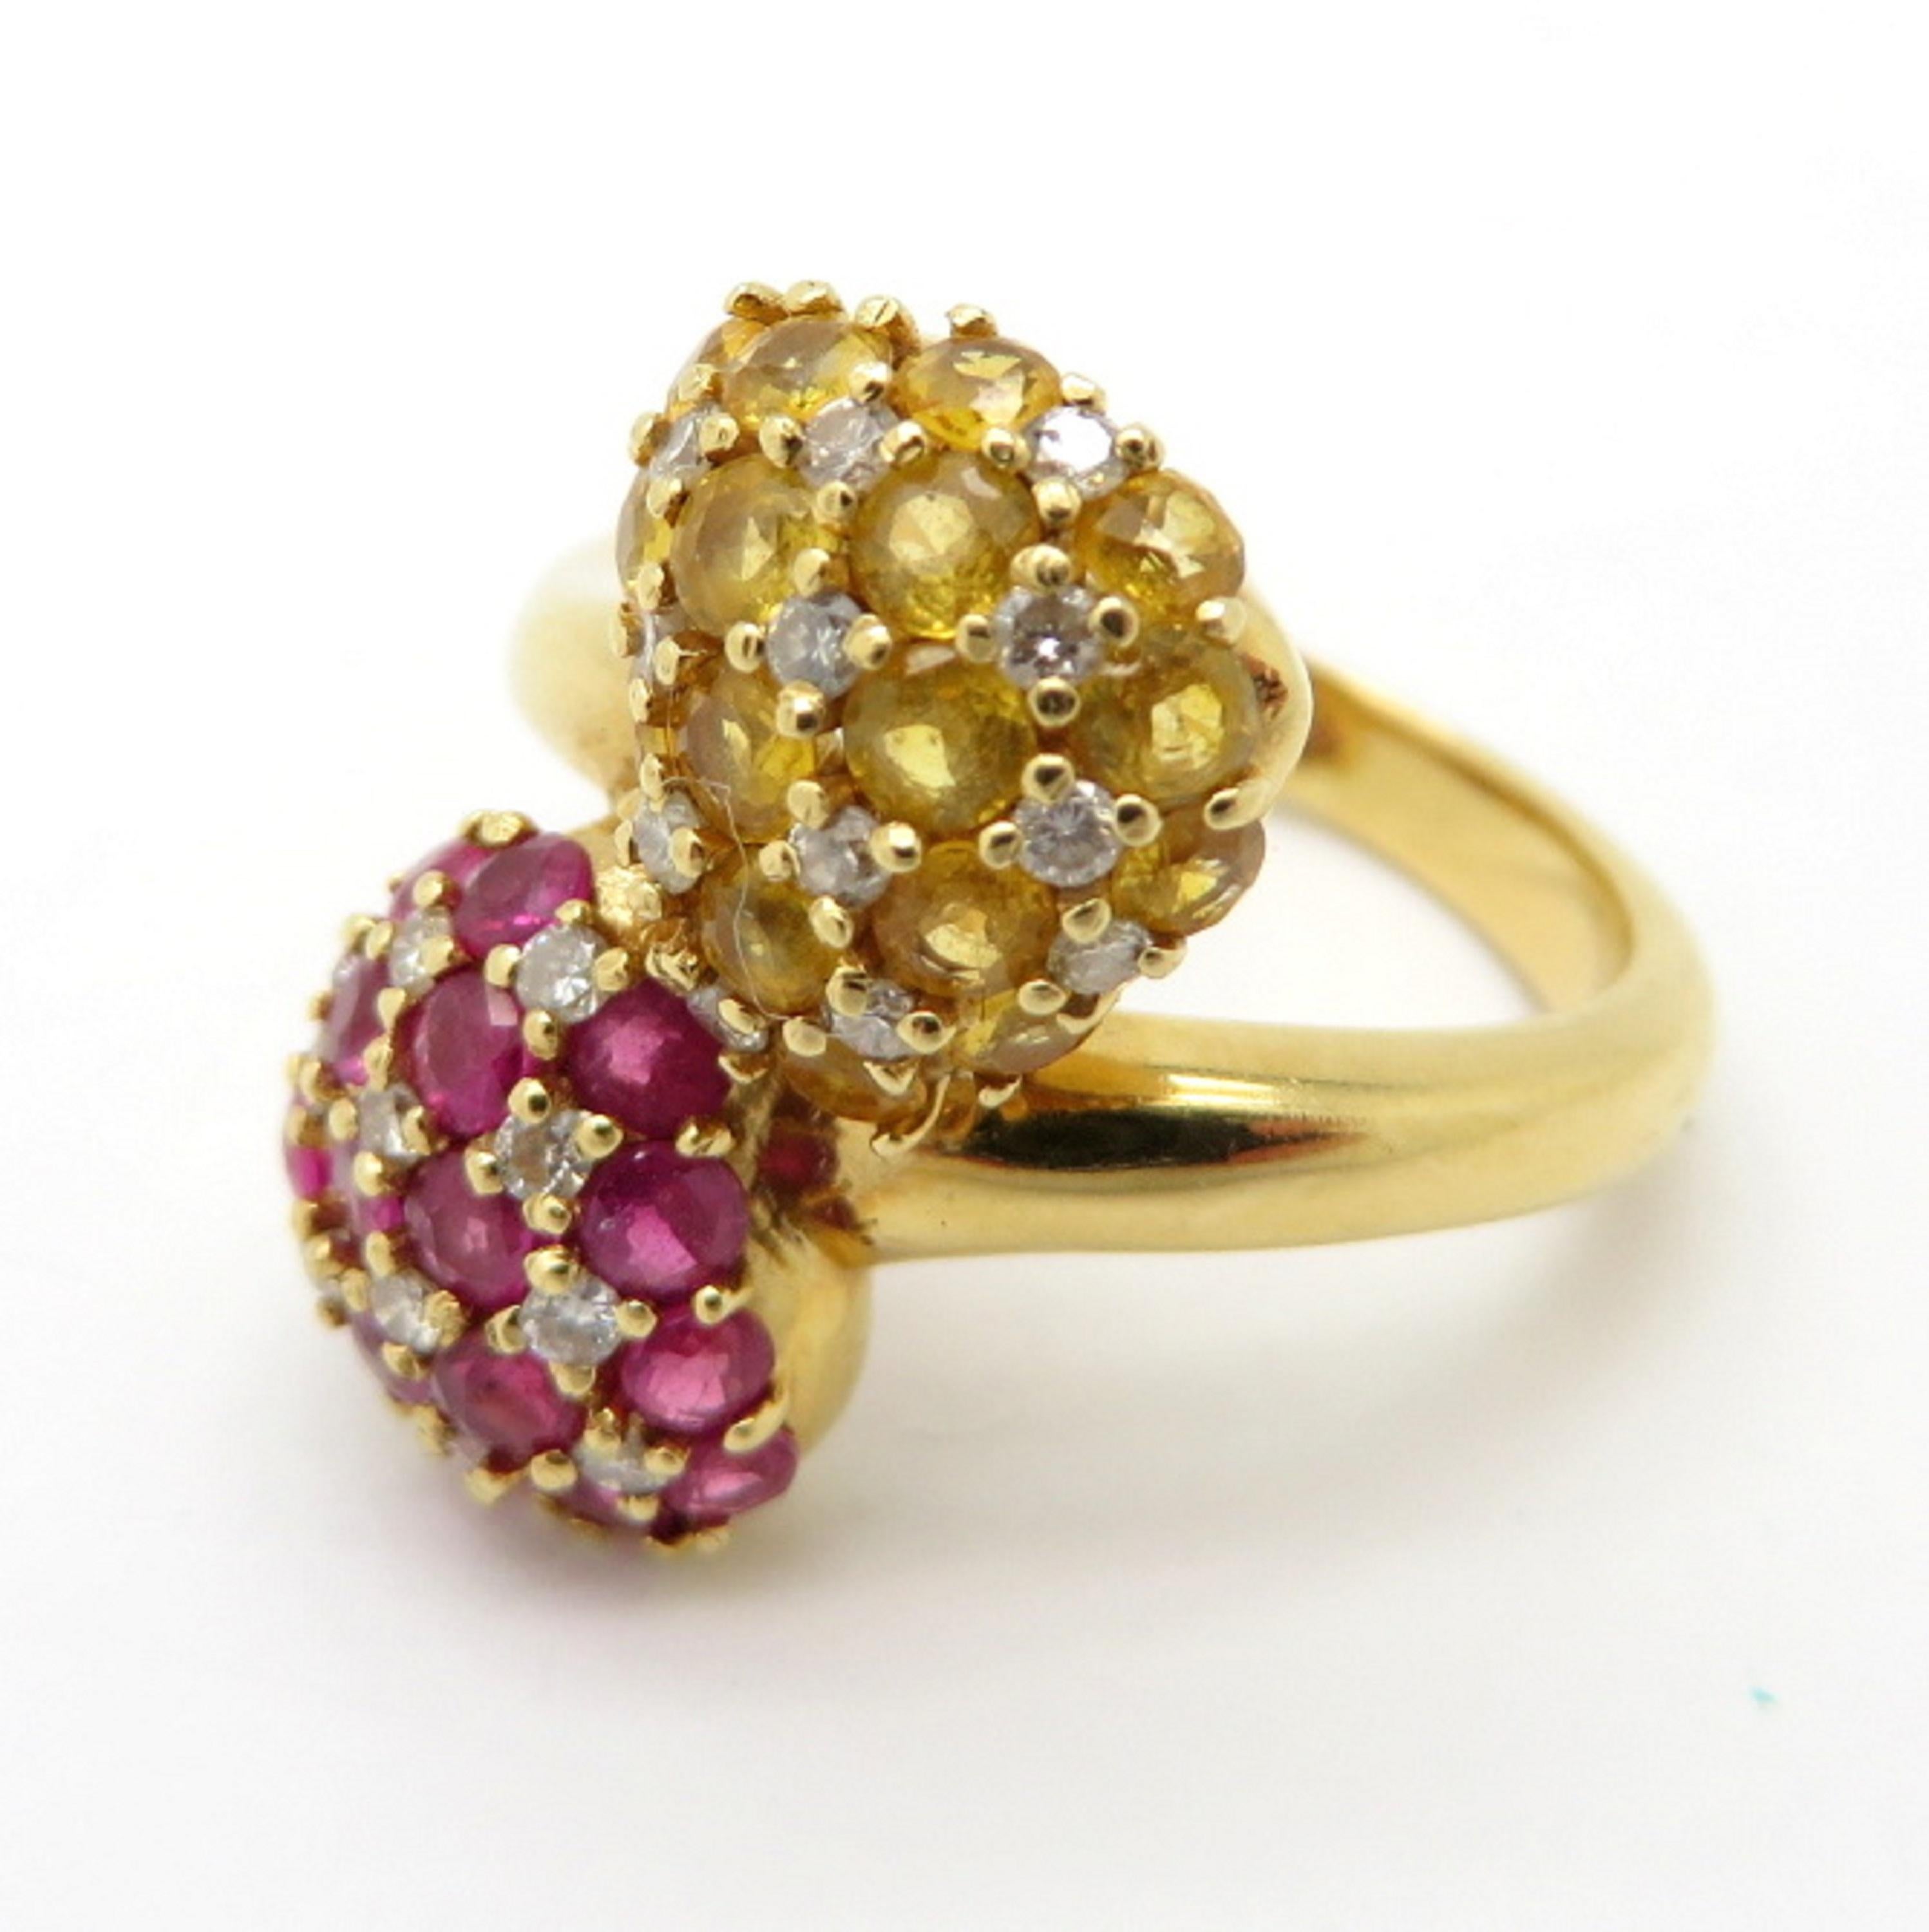 For sale is a lovely estate pave yellow sapphire and ruby bypass ring set in 18K Yellow Gold!
Featuring 34 Round Brilliant Cut yellow sapphires and rubies, with various measurements and 24 Round Brilliant Cut diamonds, weighing 0.15 carats.  
The